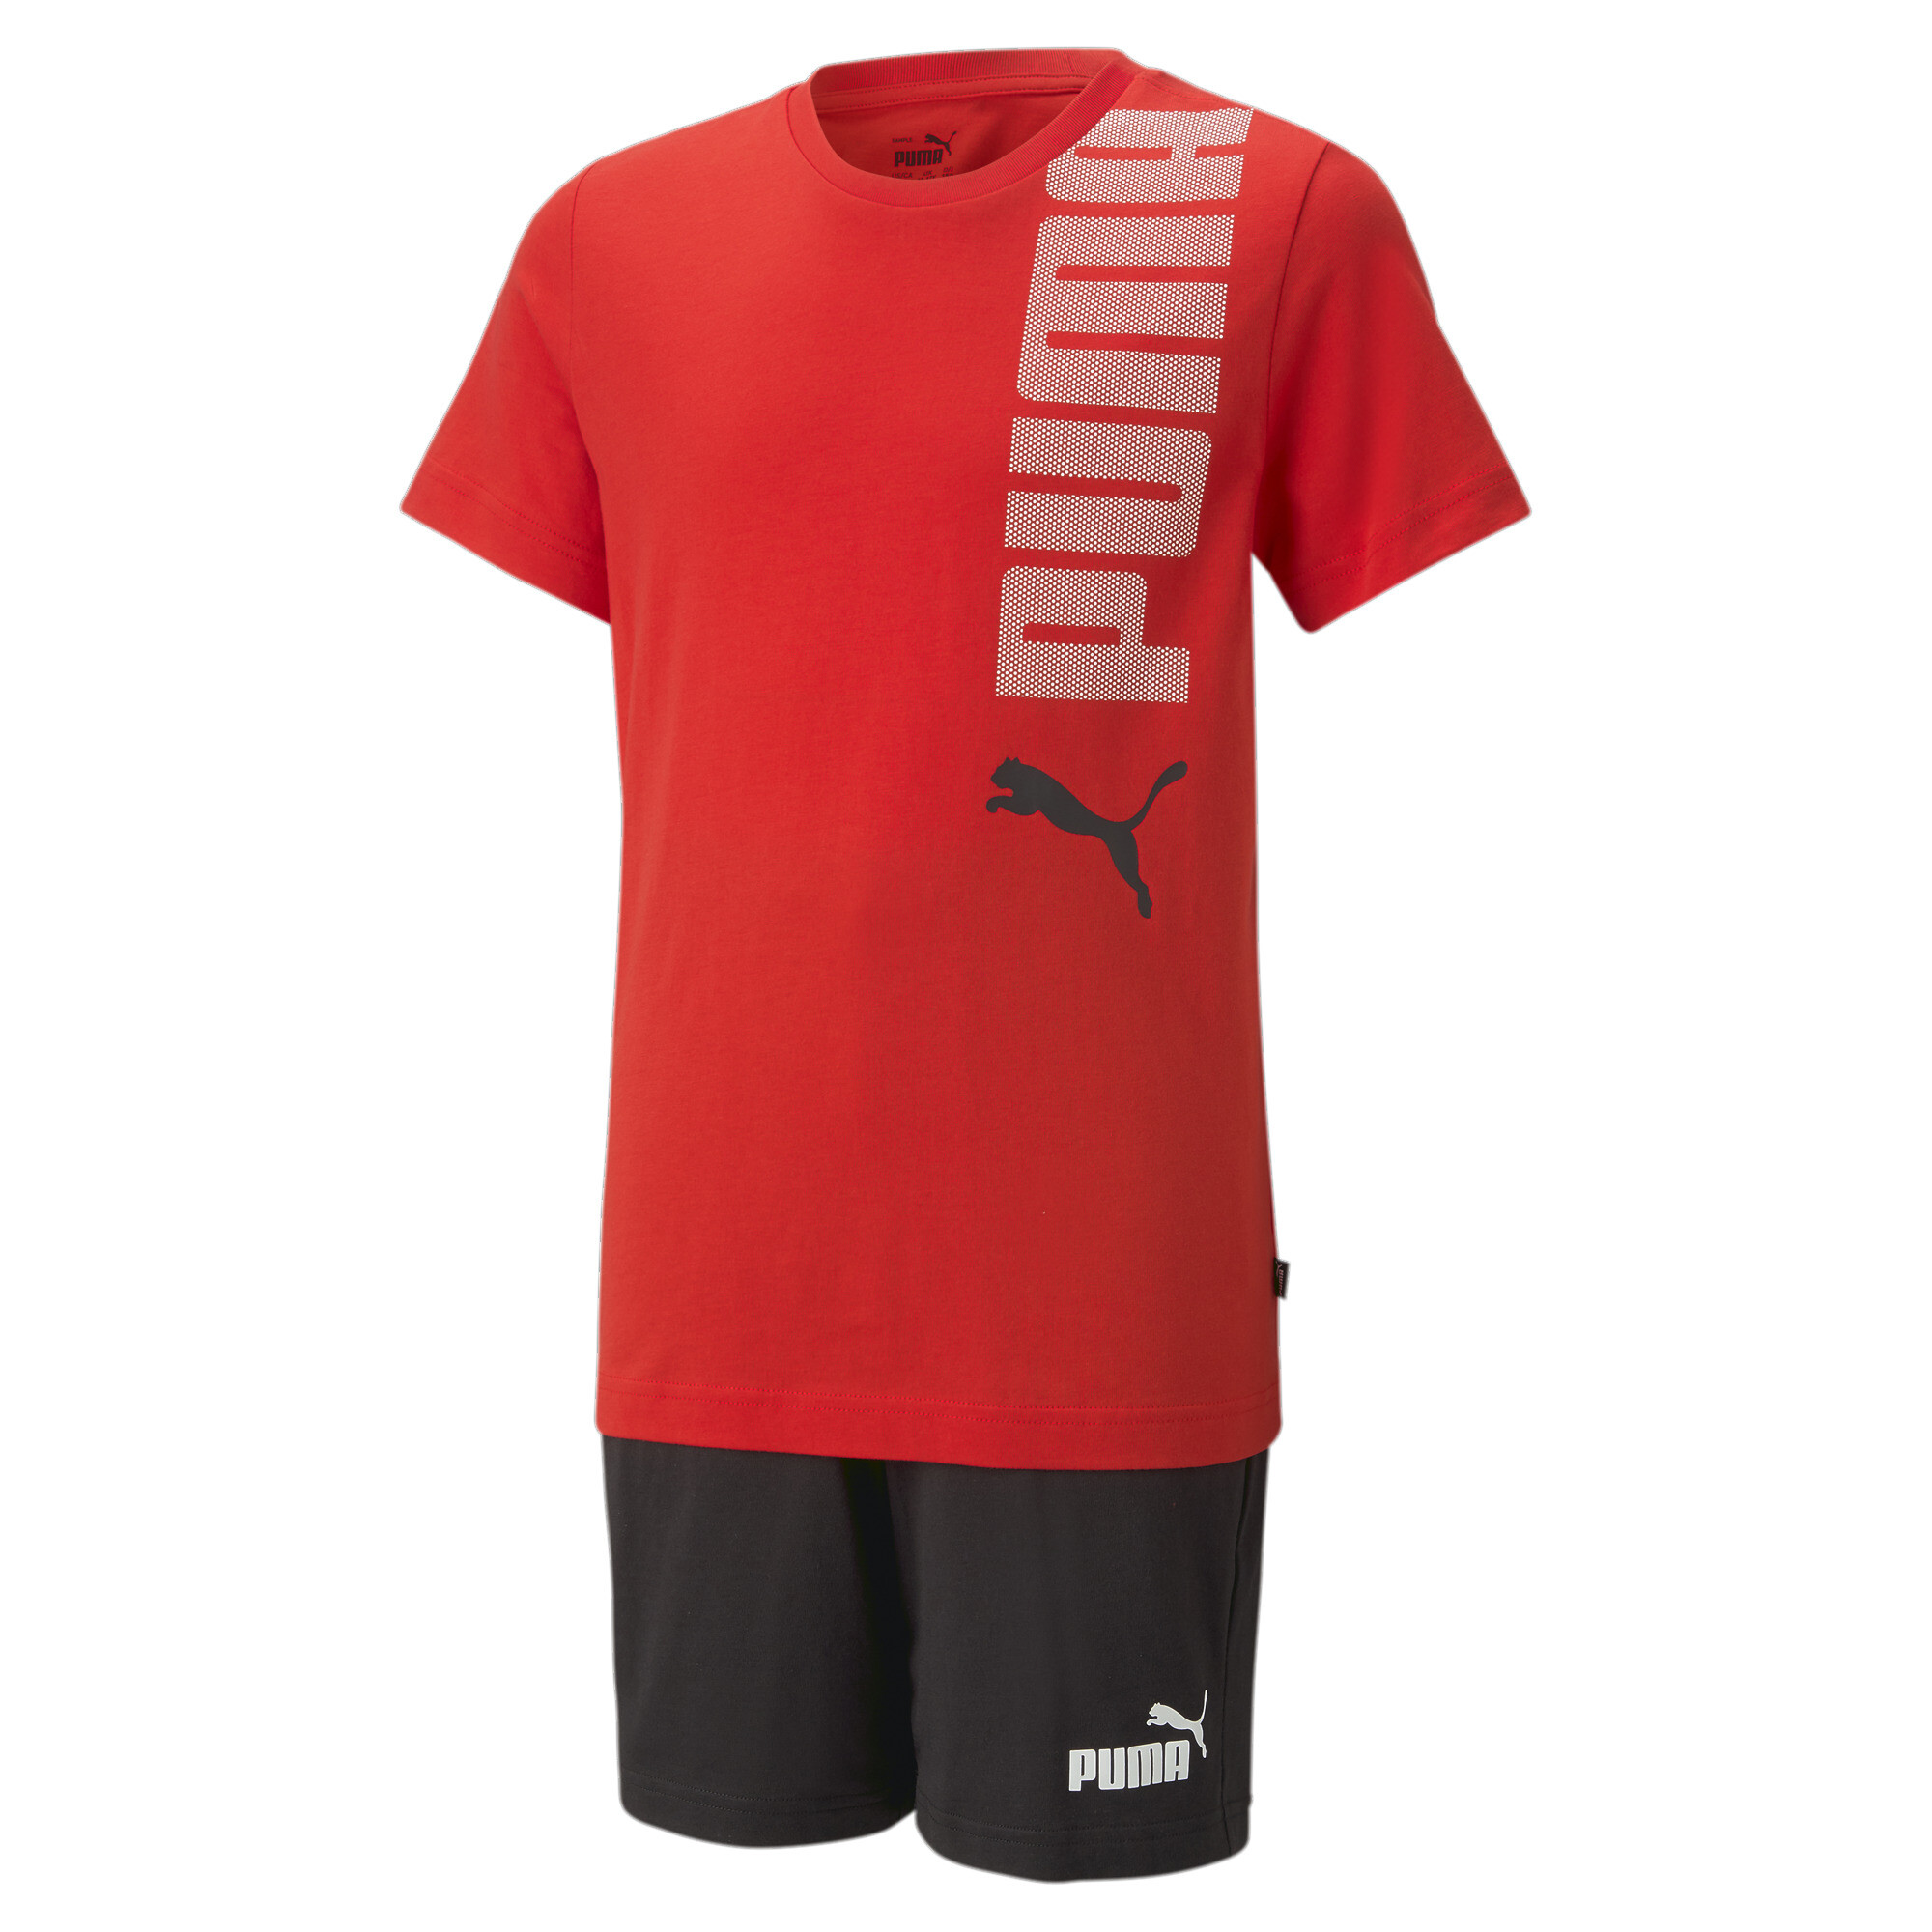 30%OFF！ プーマ キッズ ボーイズ ロゴ ラボ 上下 2点セット Tシャツ & ショーツ 120-160cm メンズ For All Time Red ｜PUMA.comの画像